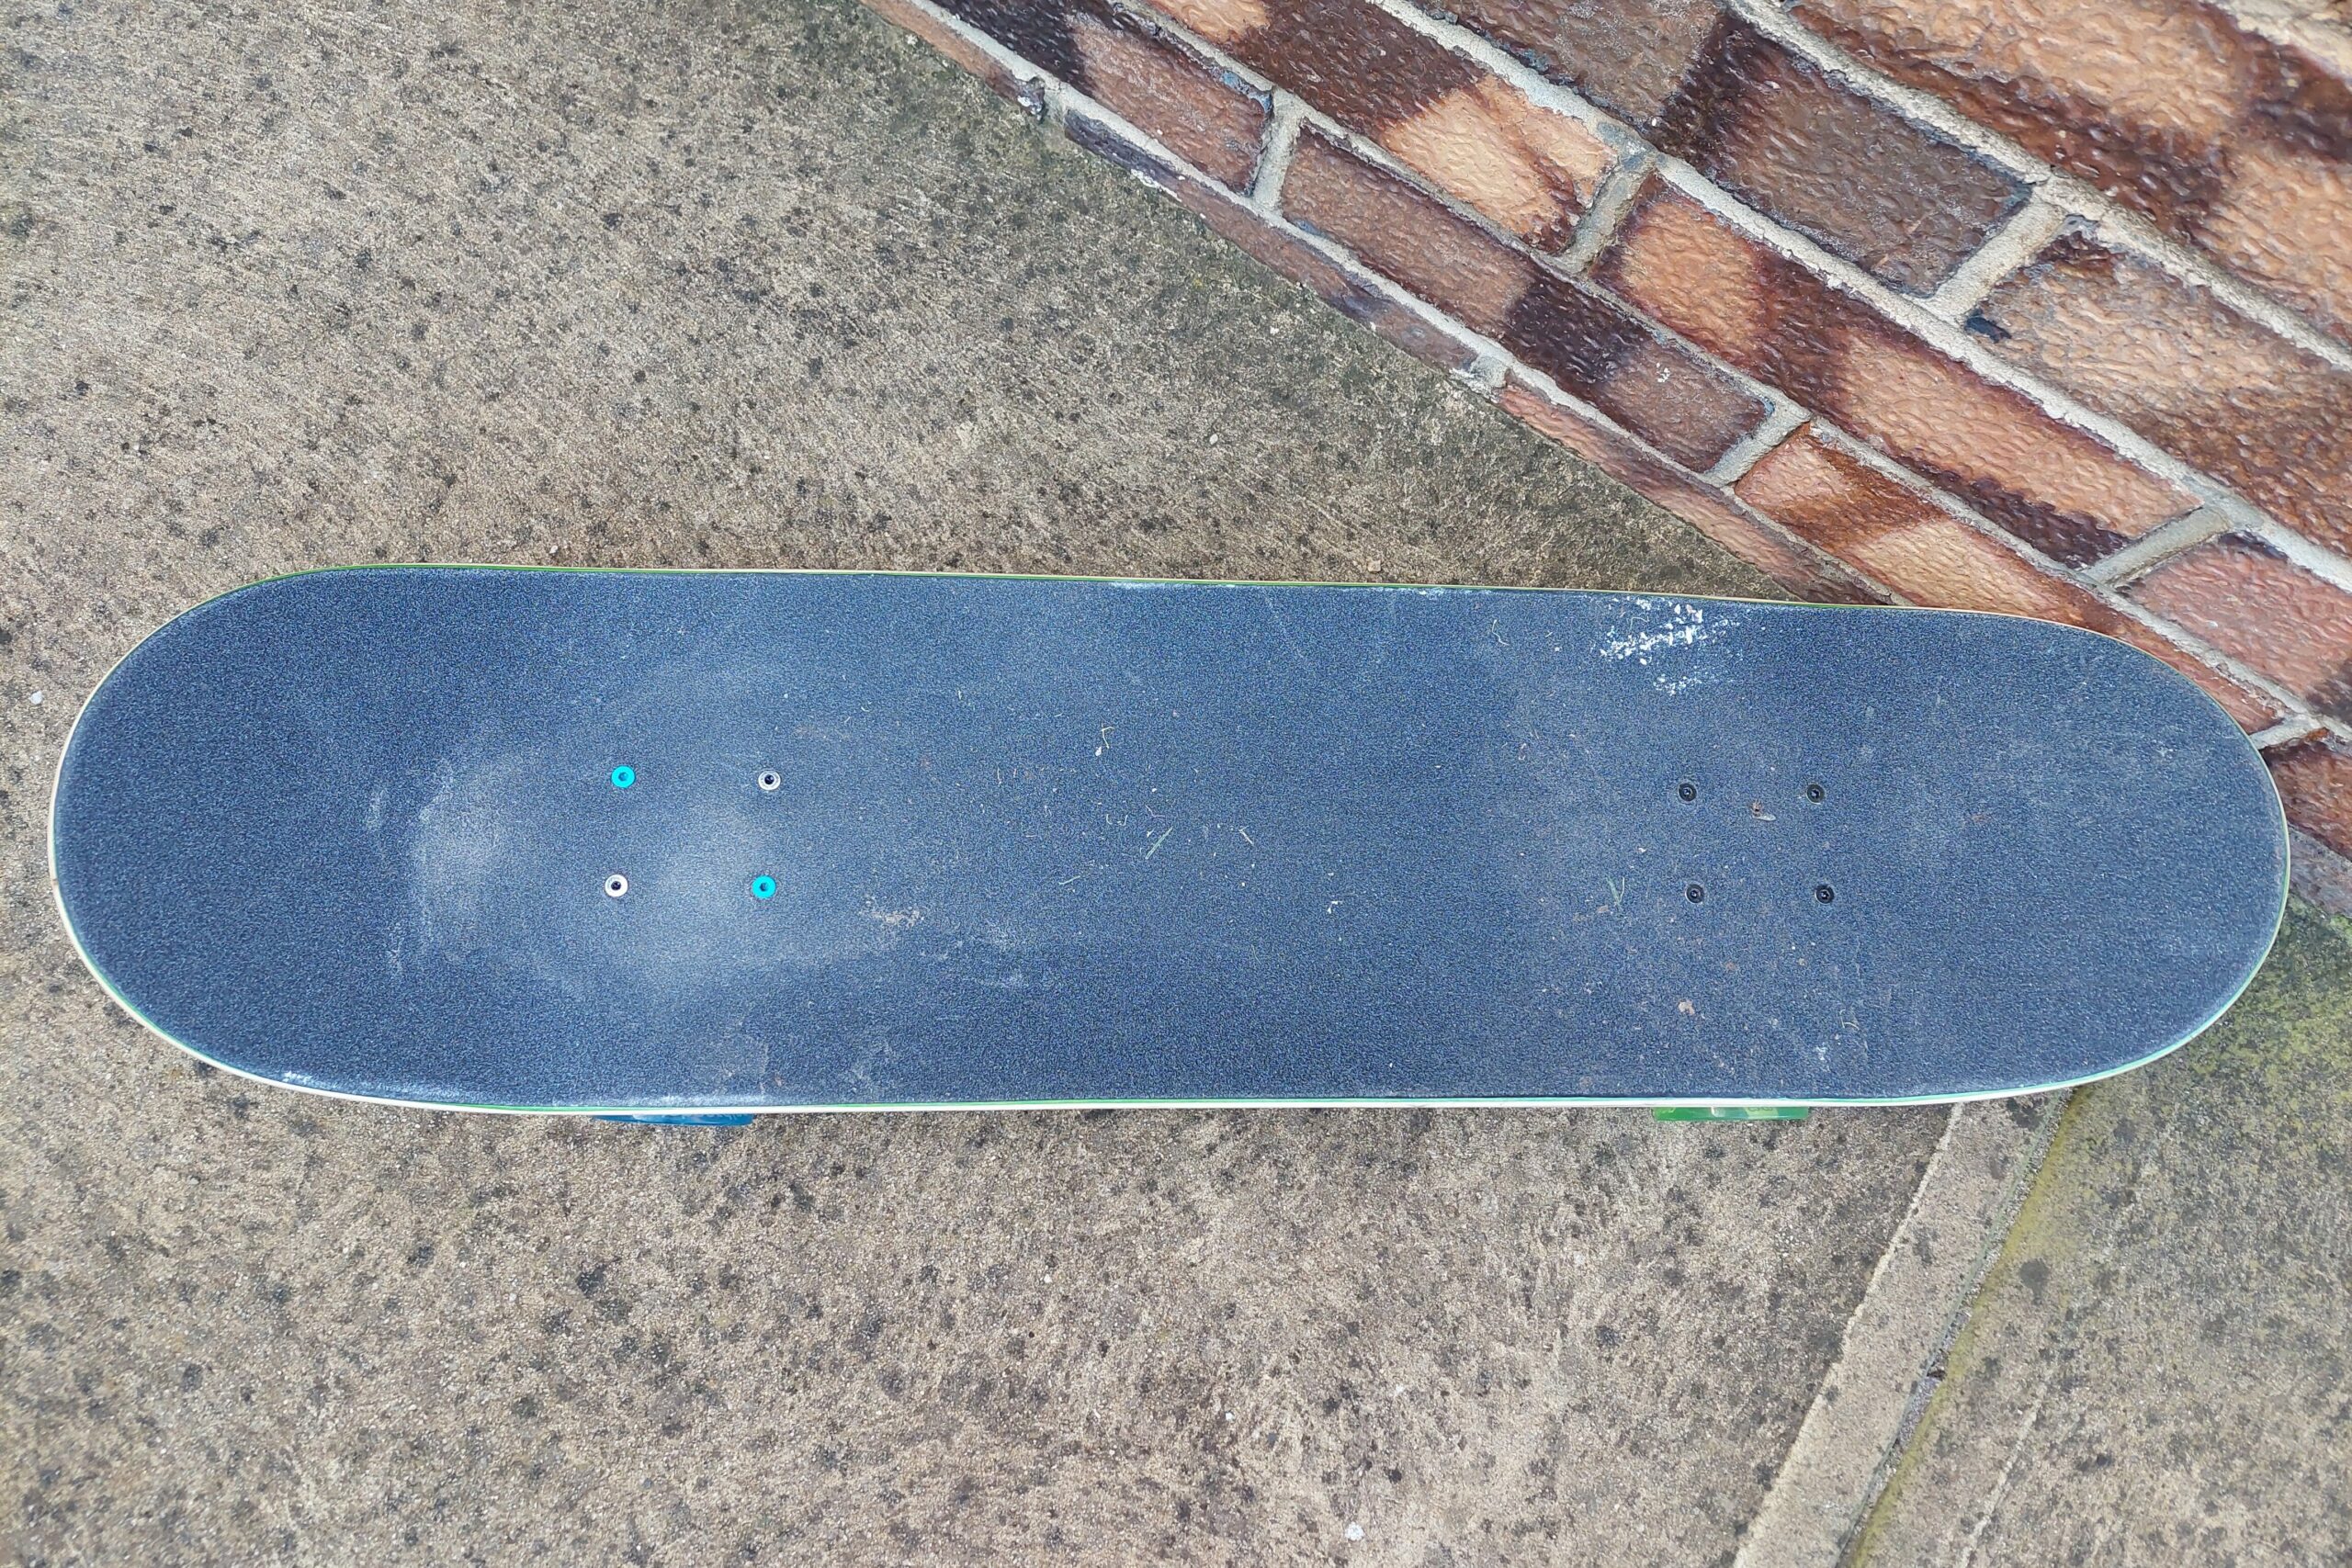 A top-down view of a dirty skateboard on concrete.